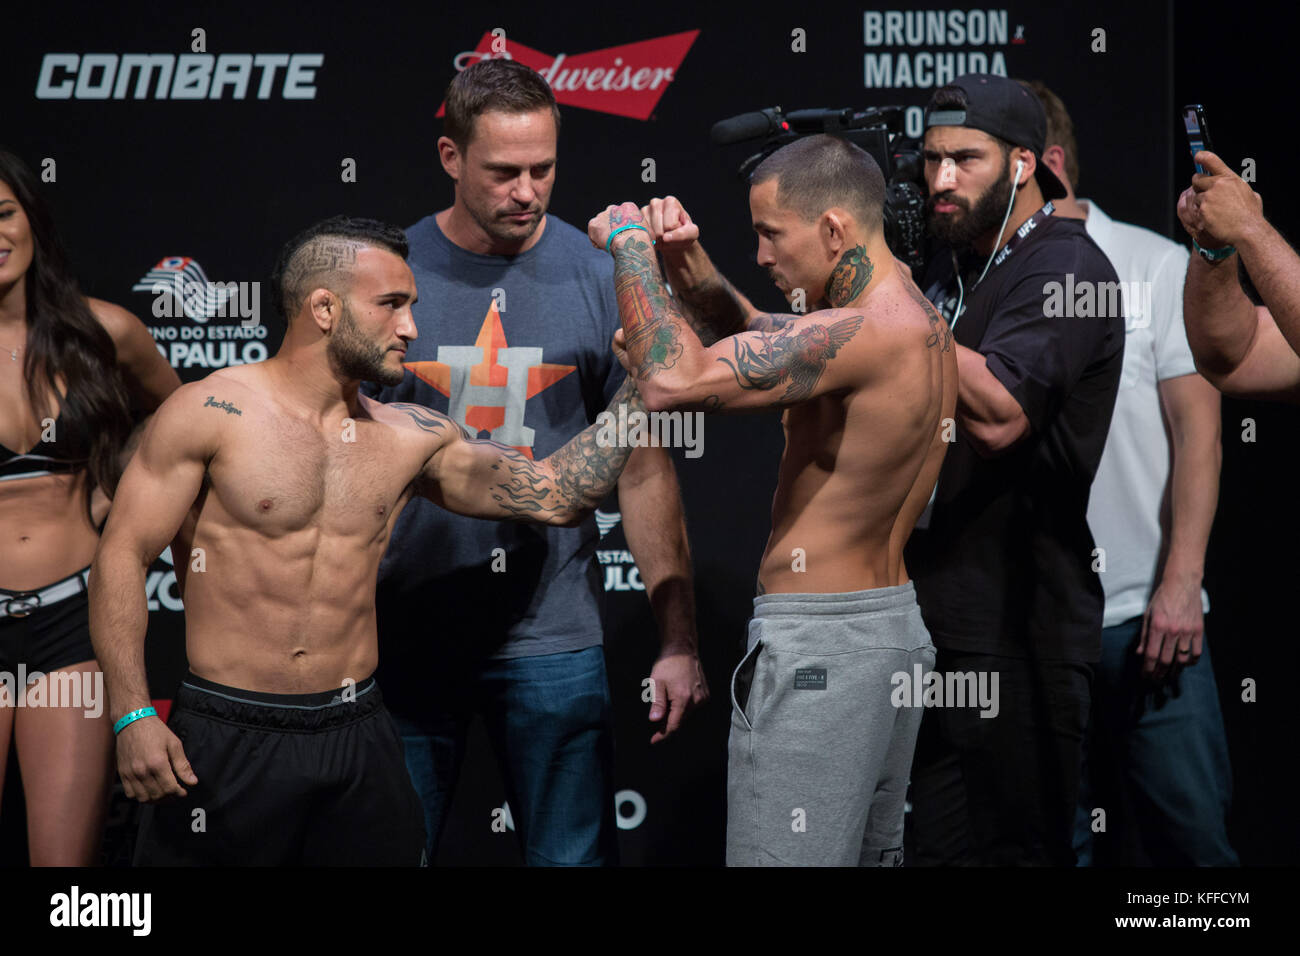 São Paulo, Brazil. 27th October, 2017. Opponents John Lineker of Brazil and Marlon Vera of Ecuador face off during the weighing in the UFC weigh-in event prior to the UFC Fight Night Sao Paulo, at the Ibirapuera Gymnasium. Paulo Lopes/BW Press/Alamy Live News Stock Photo